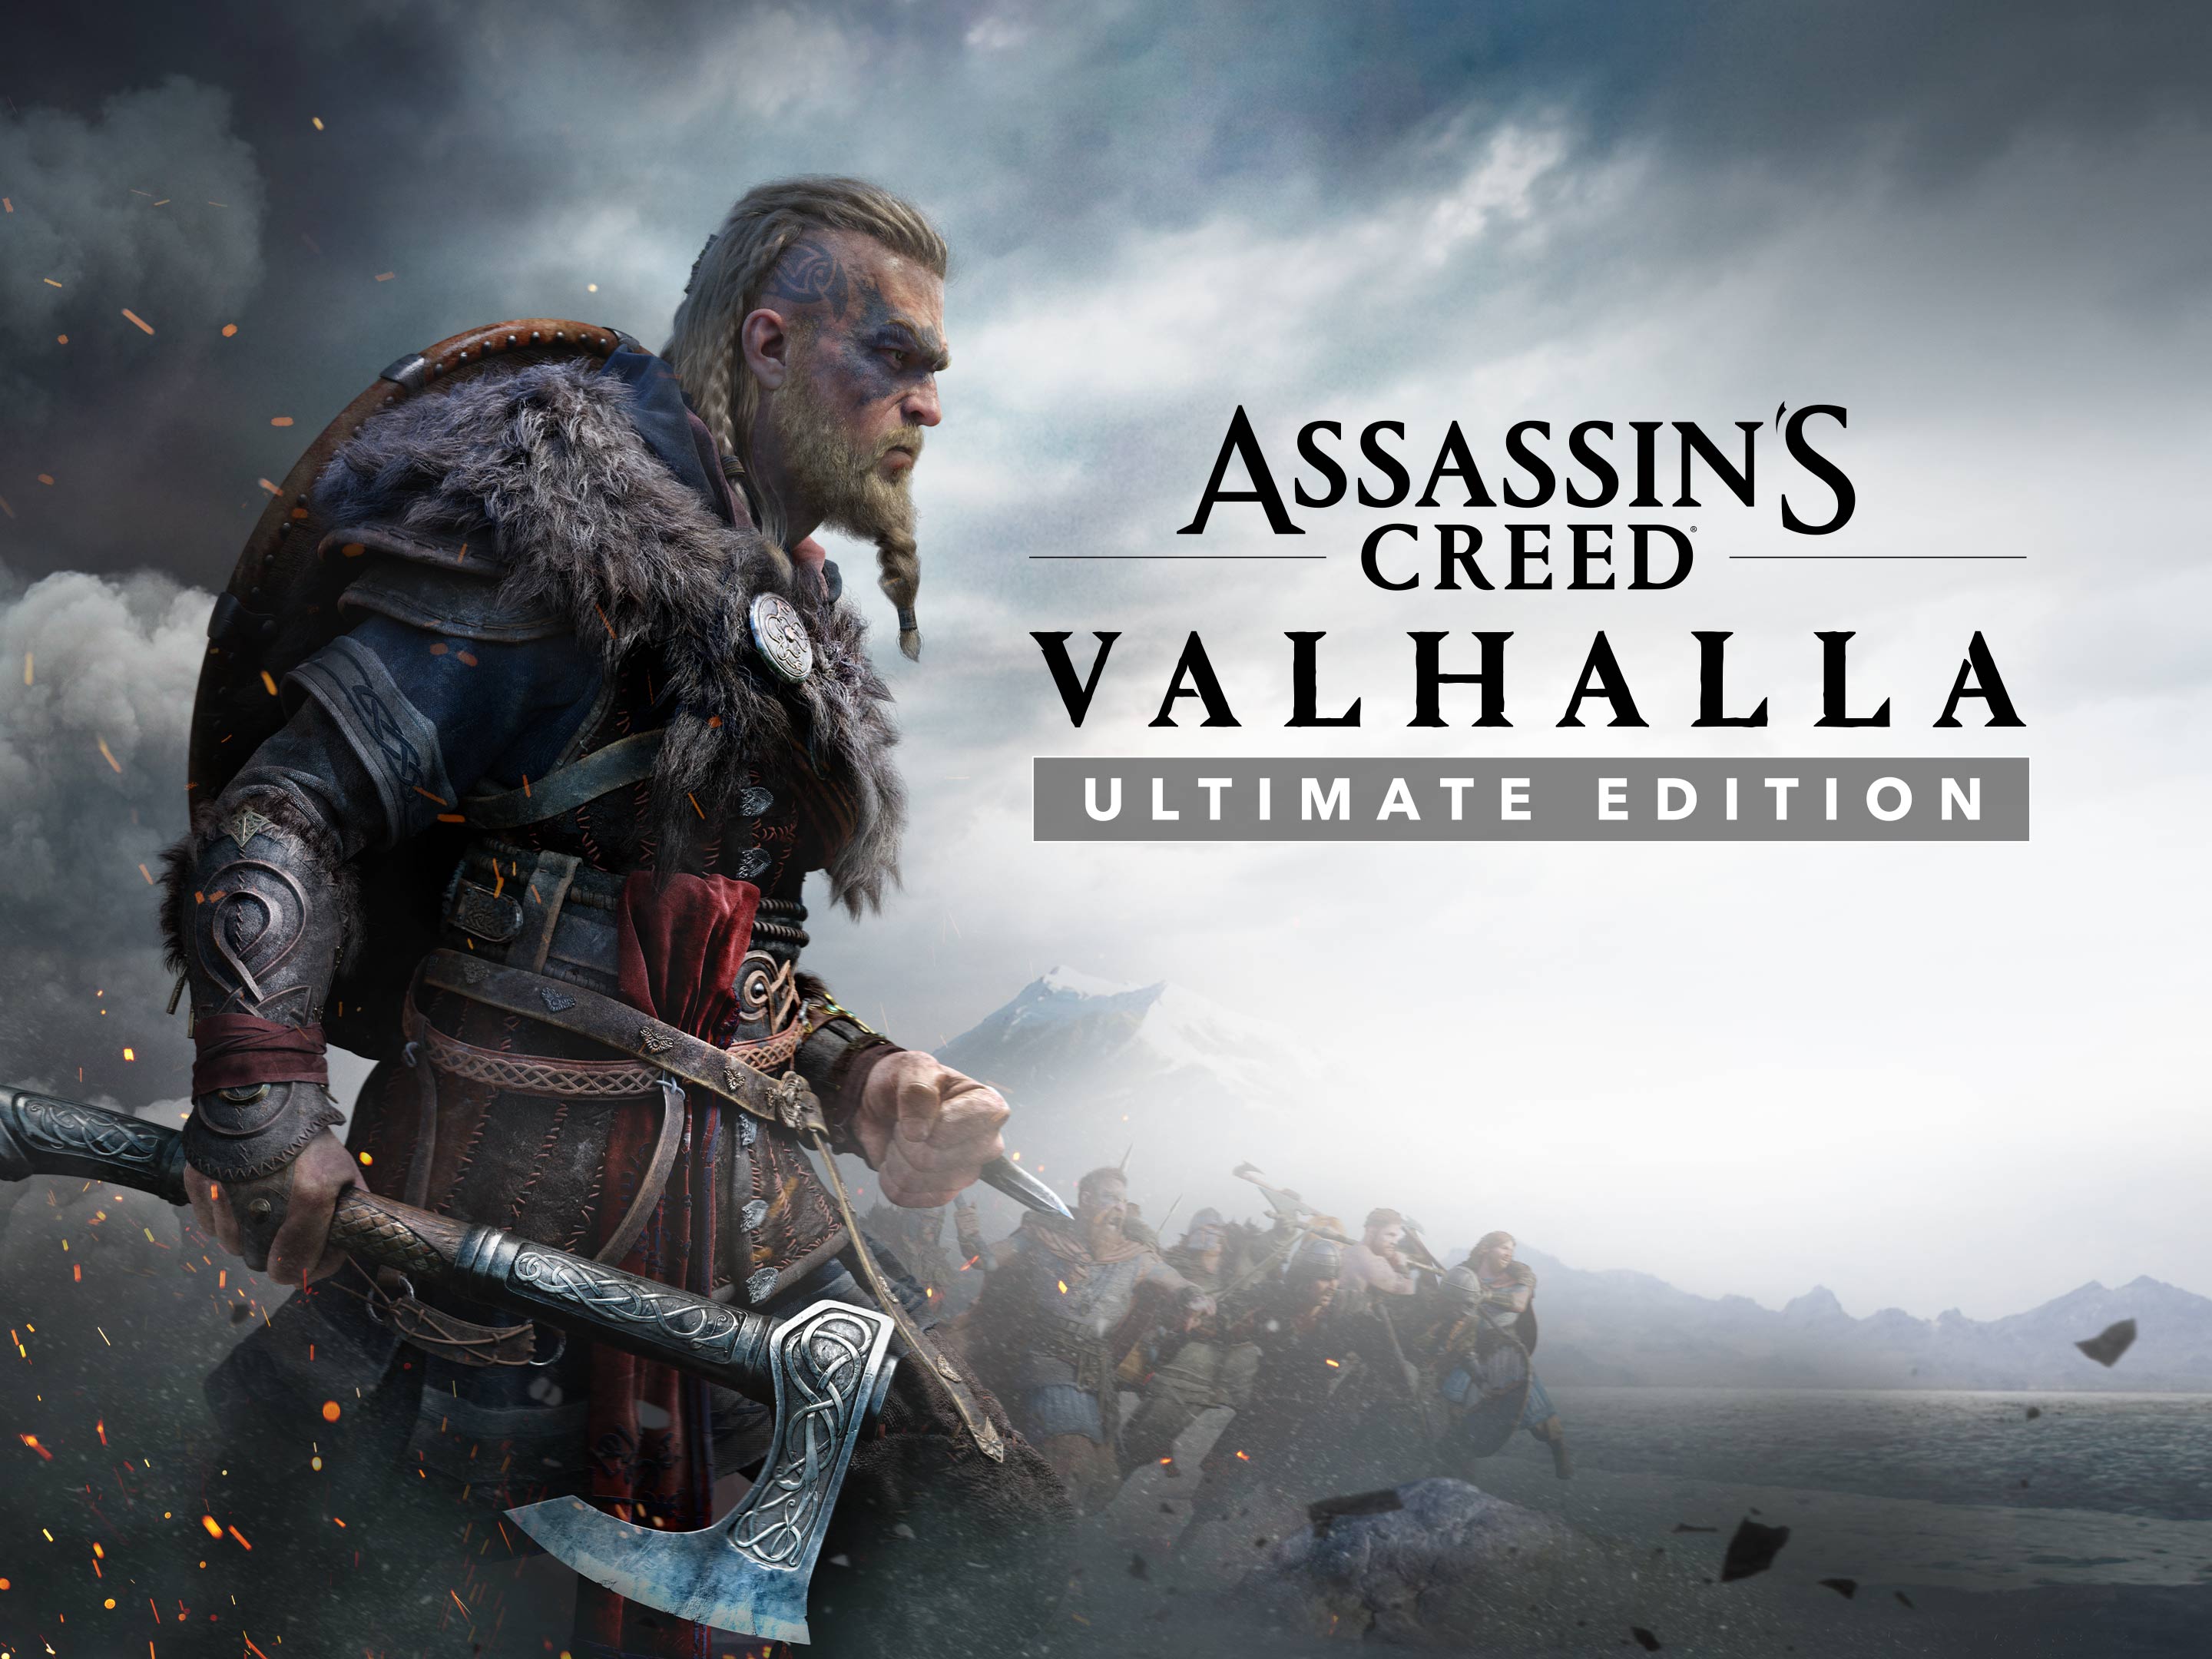 Sold Assassins Creed Valhalla Ultimate Online Access Uplay